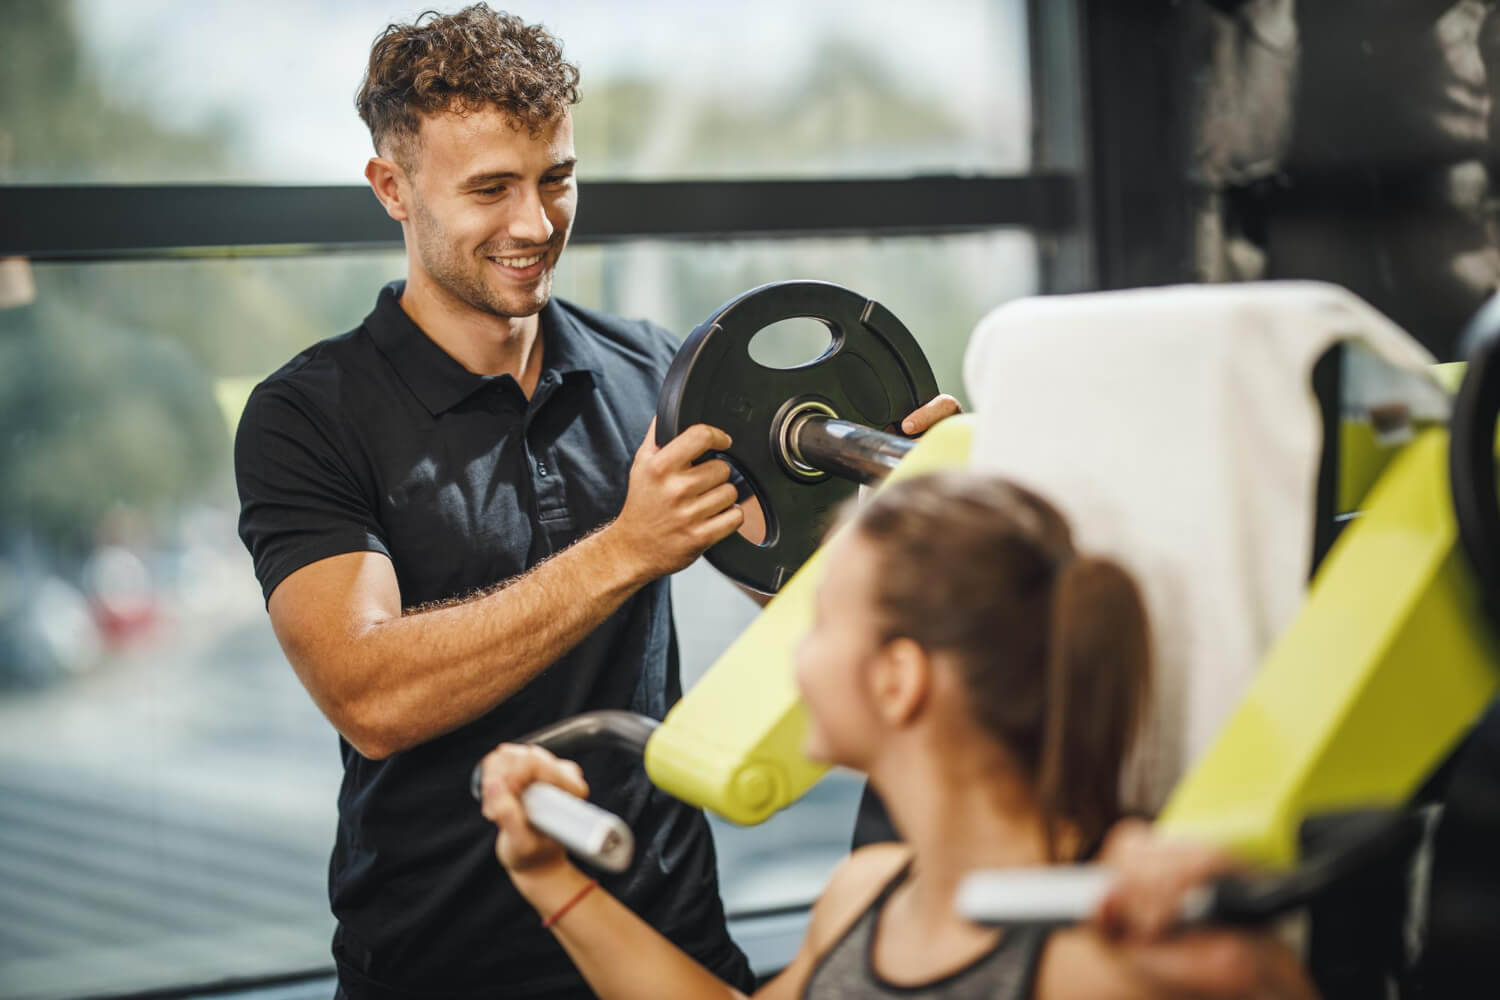 fitness business ideas for your next venture